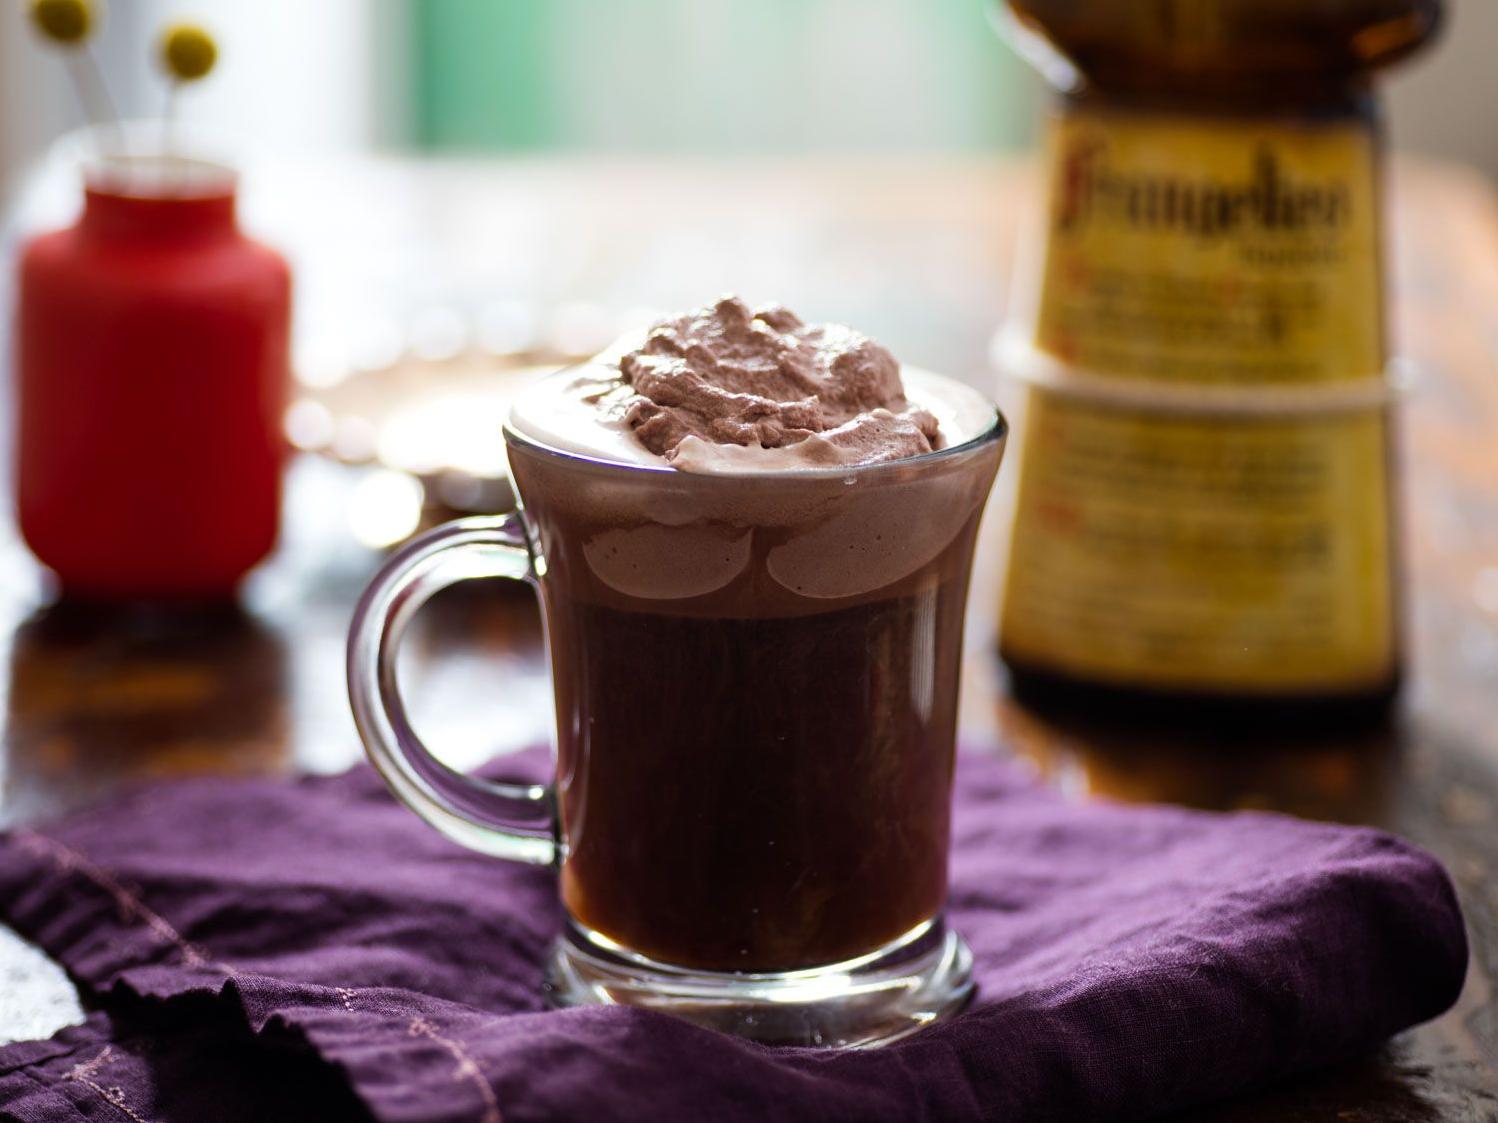  Satisfy your cravings for both coffee and chocolate with this delightful recipe!